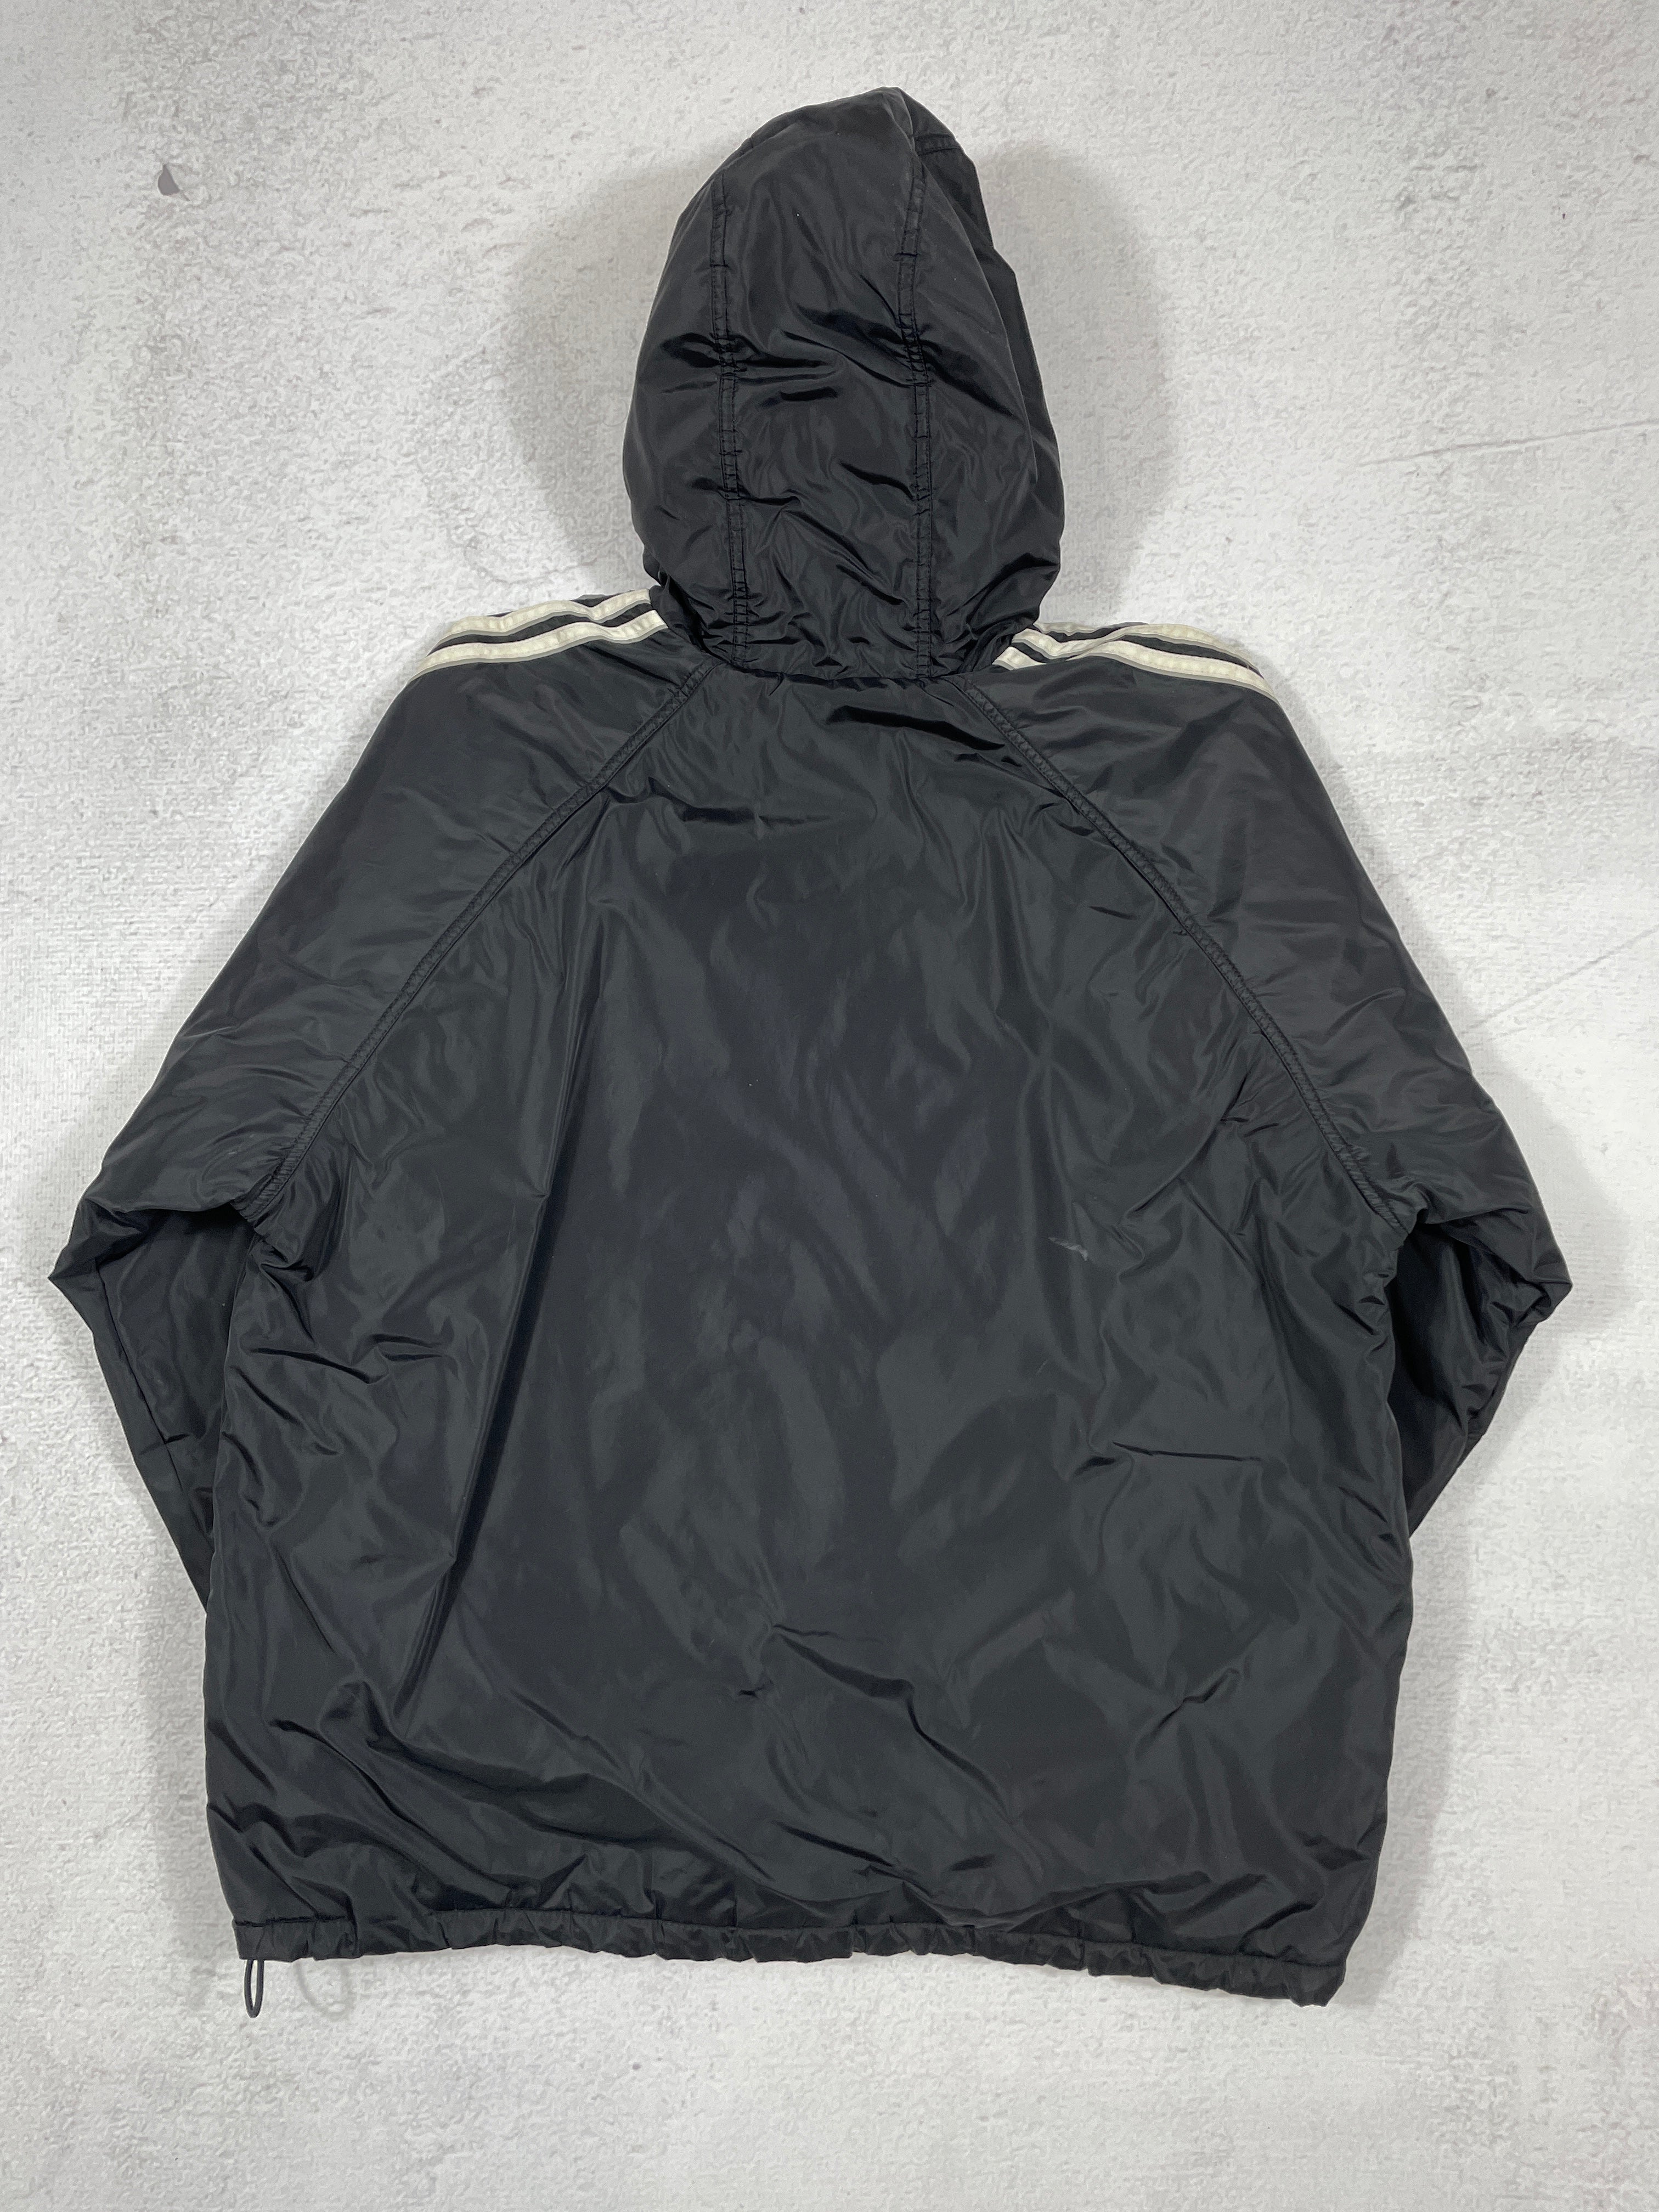 Vintage Adidas Reversible Insulated Jacket - Men's XL